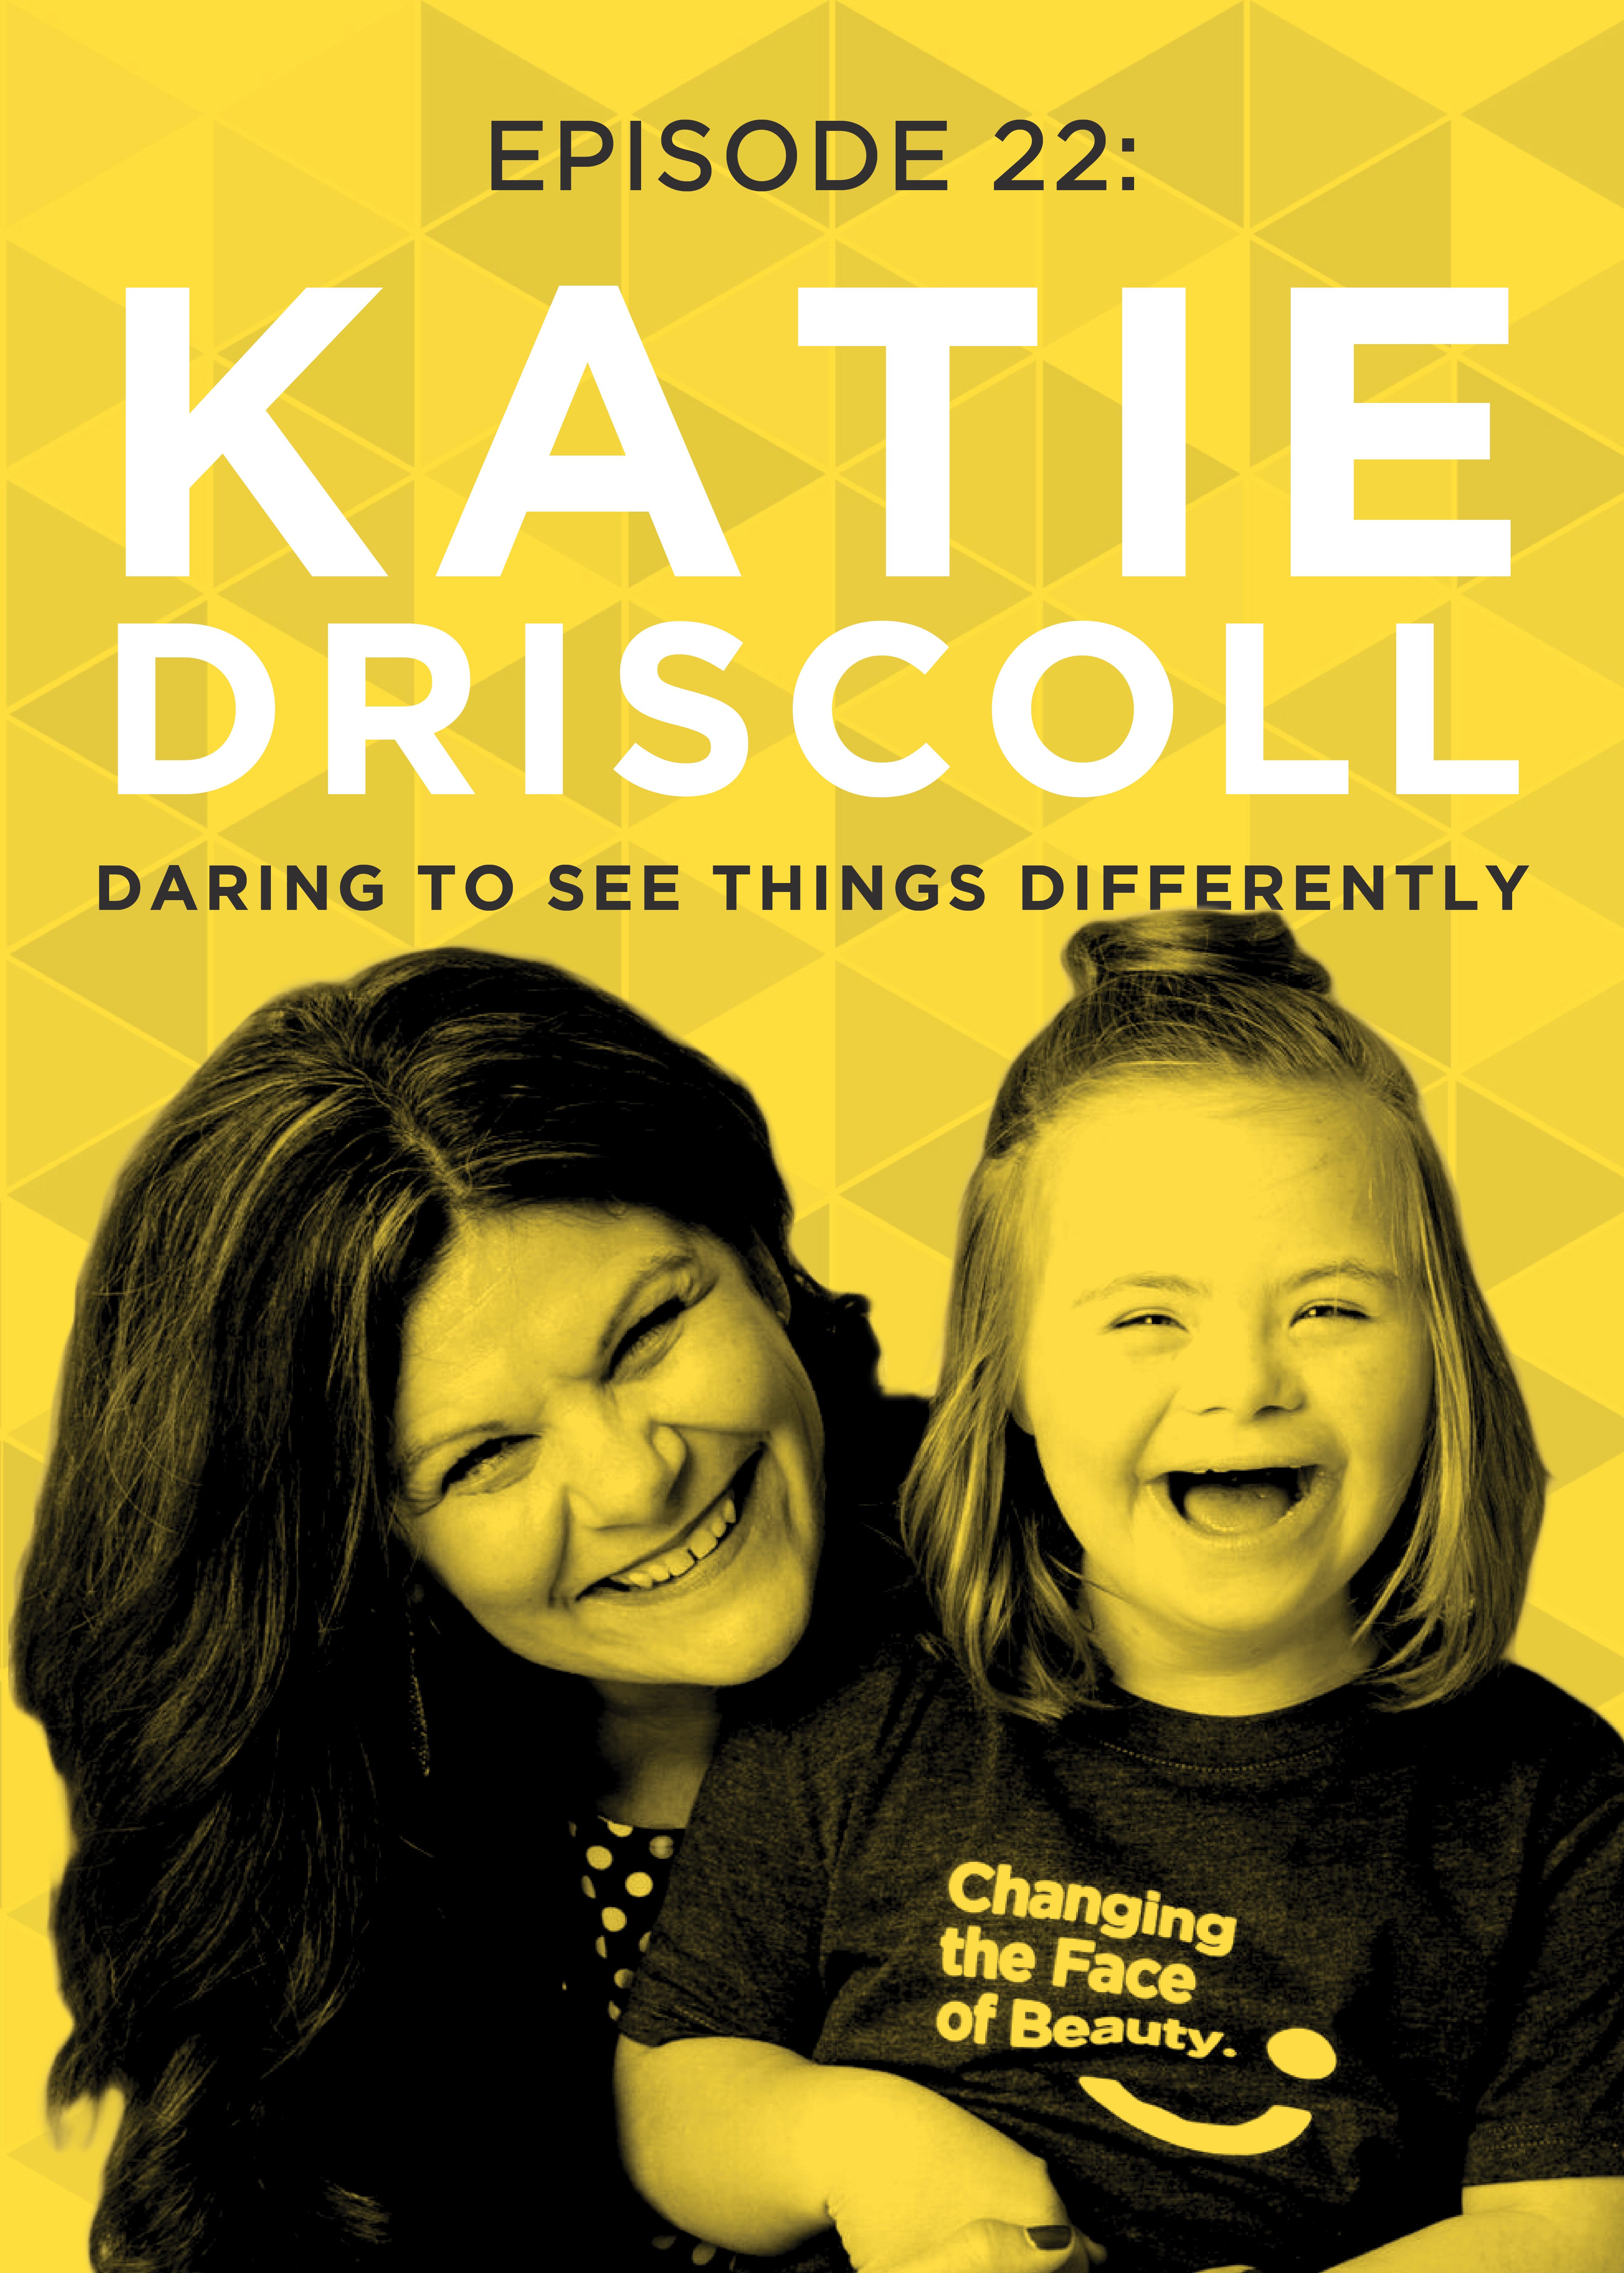 EP 22: Daring to See Things Differently with Katie Driscoll